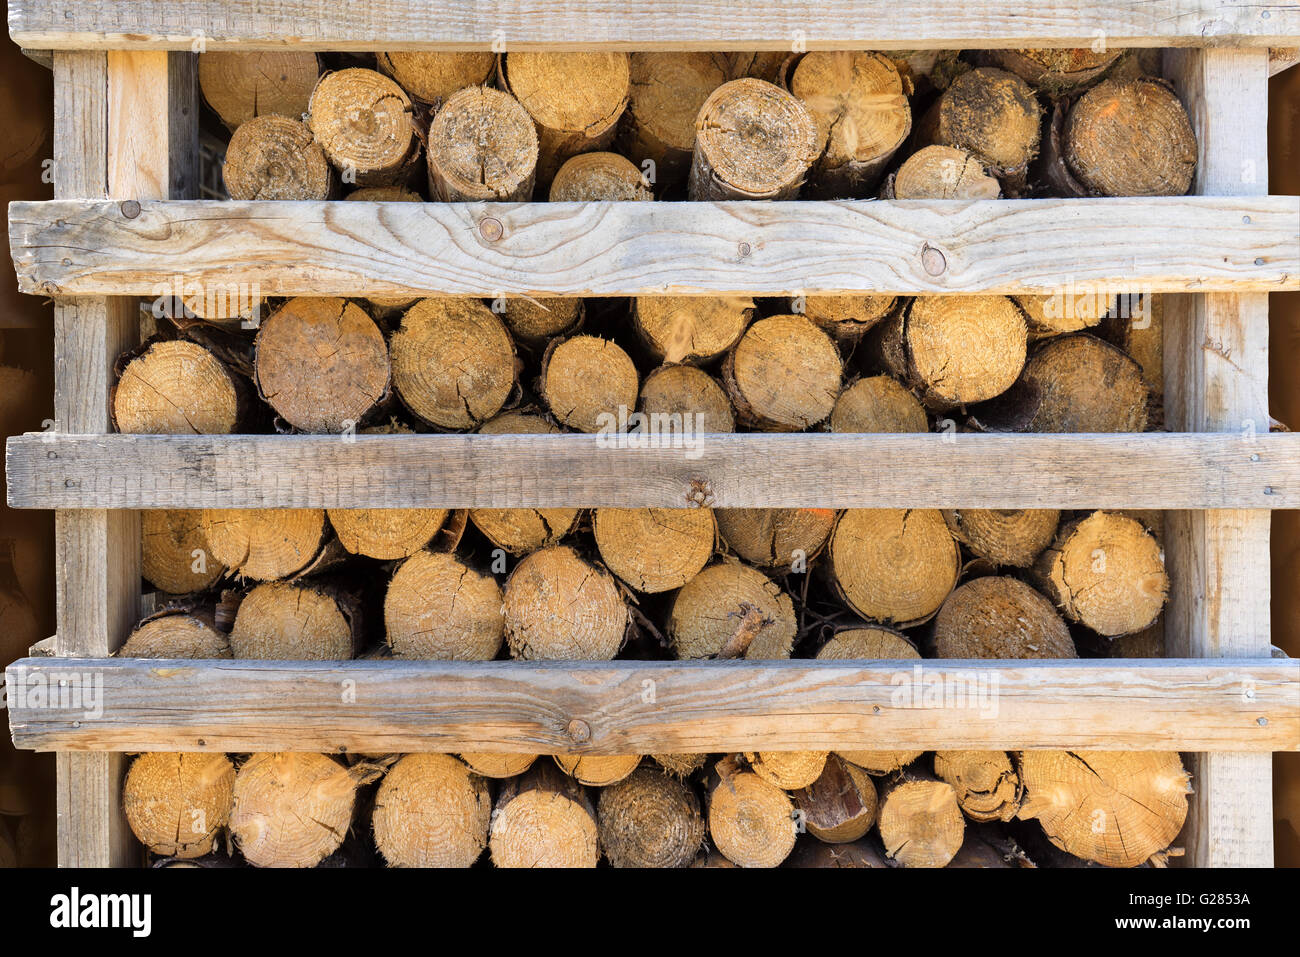 Firewood in a half-open wooden rack Stock Photo